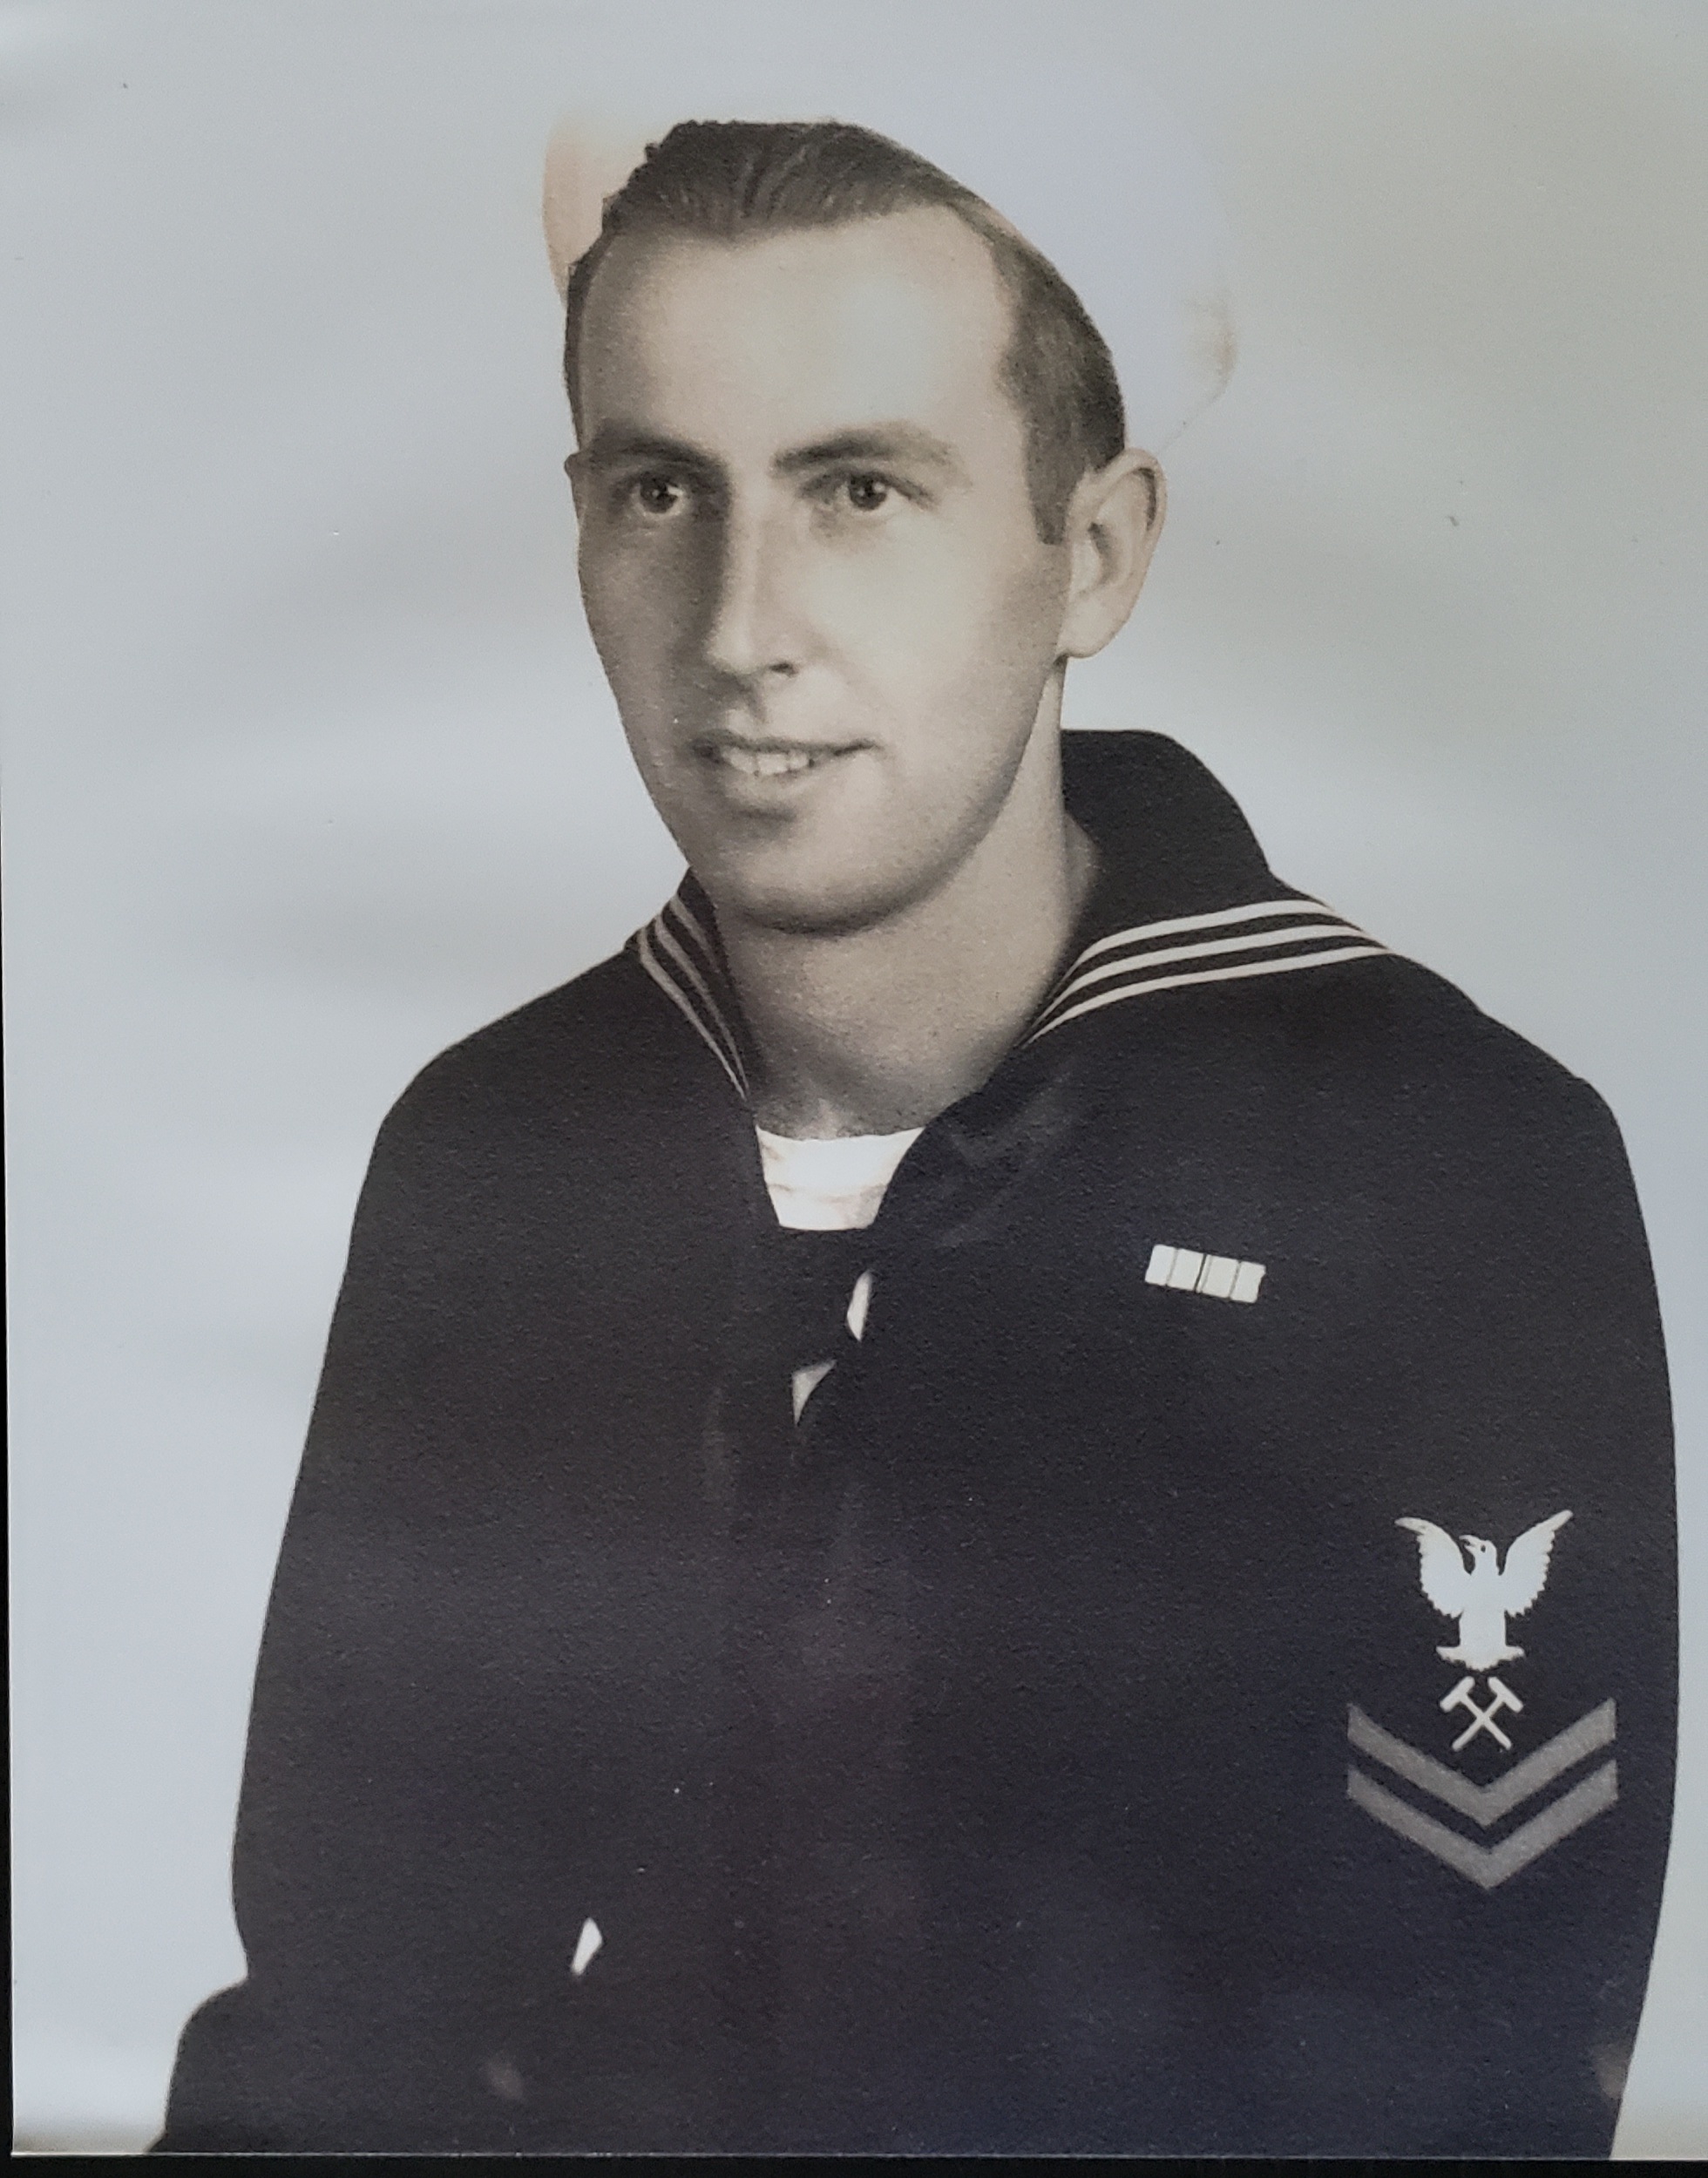 Stanley Dykovitz was a 21-year-old living in East Marion, on the North Fork, when he enlisted in the U.S. Navy in 1943. He spent time in California, Alaska, Hawaii, and Guam serving during World War II, and was part of the Sea Bees division of the Navy.